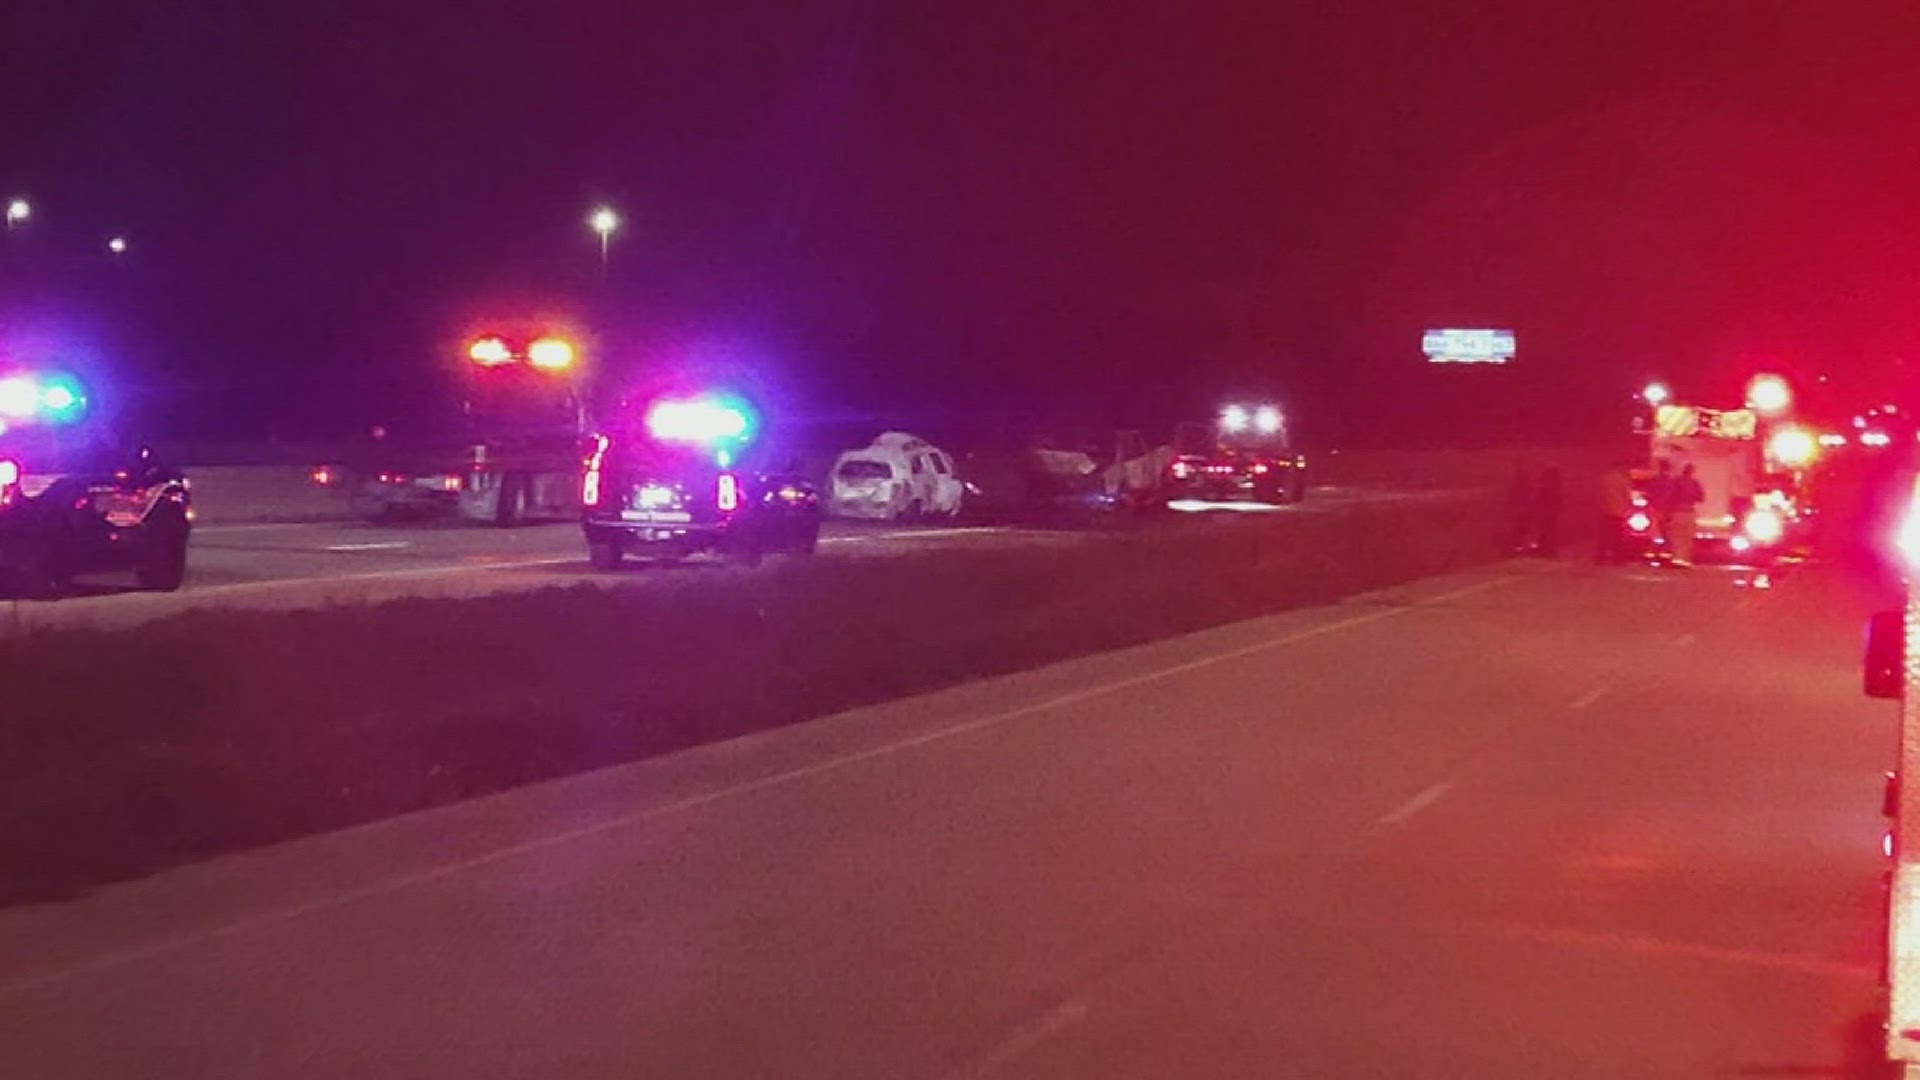 A 51-year-old South Texas man is facing intoxication manslaughter charges after two people died in a fiery wreck early Friday morning in mid-county.